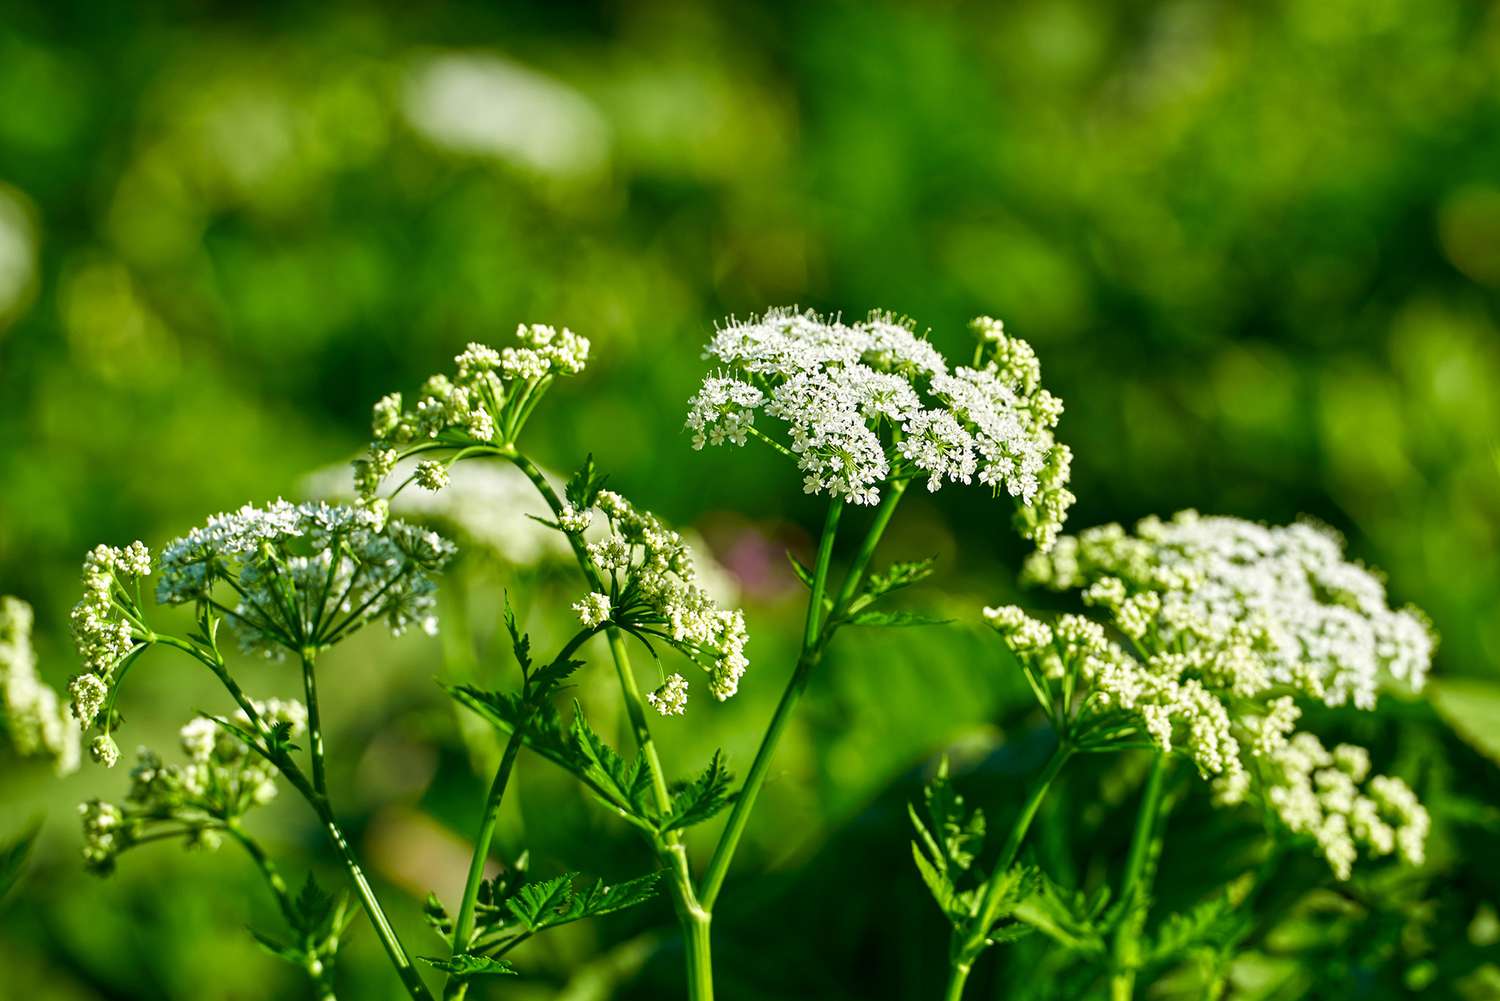 photo of poison hemlock or Conium maculatum plant with small white flowers